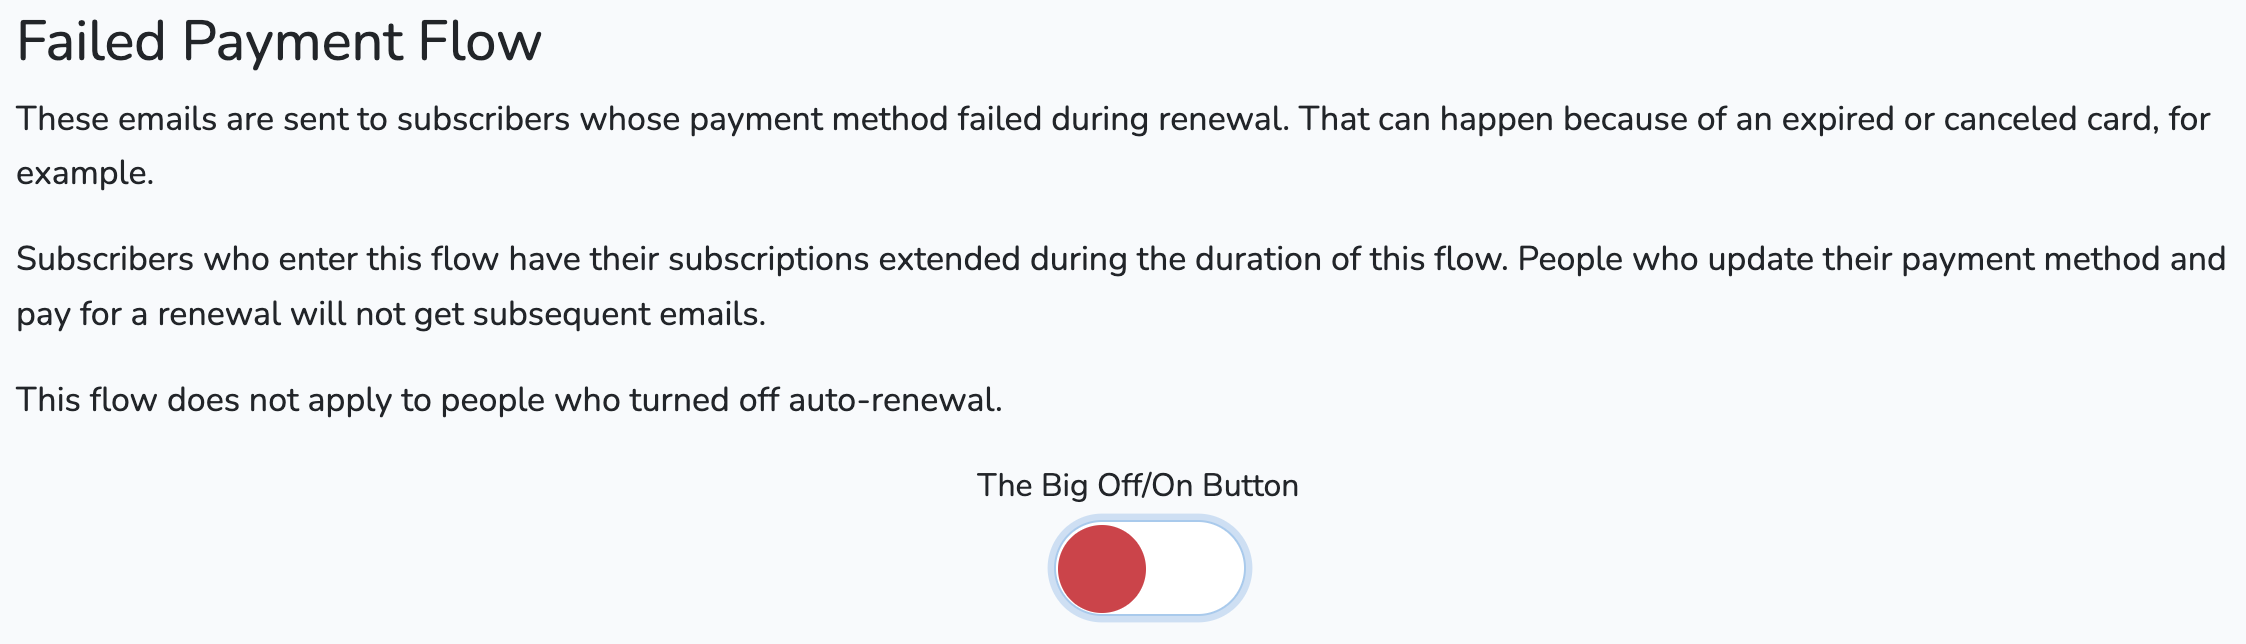 Screenshot of Off/On Button in starting Off position